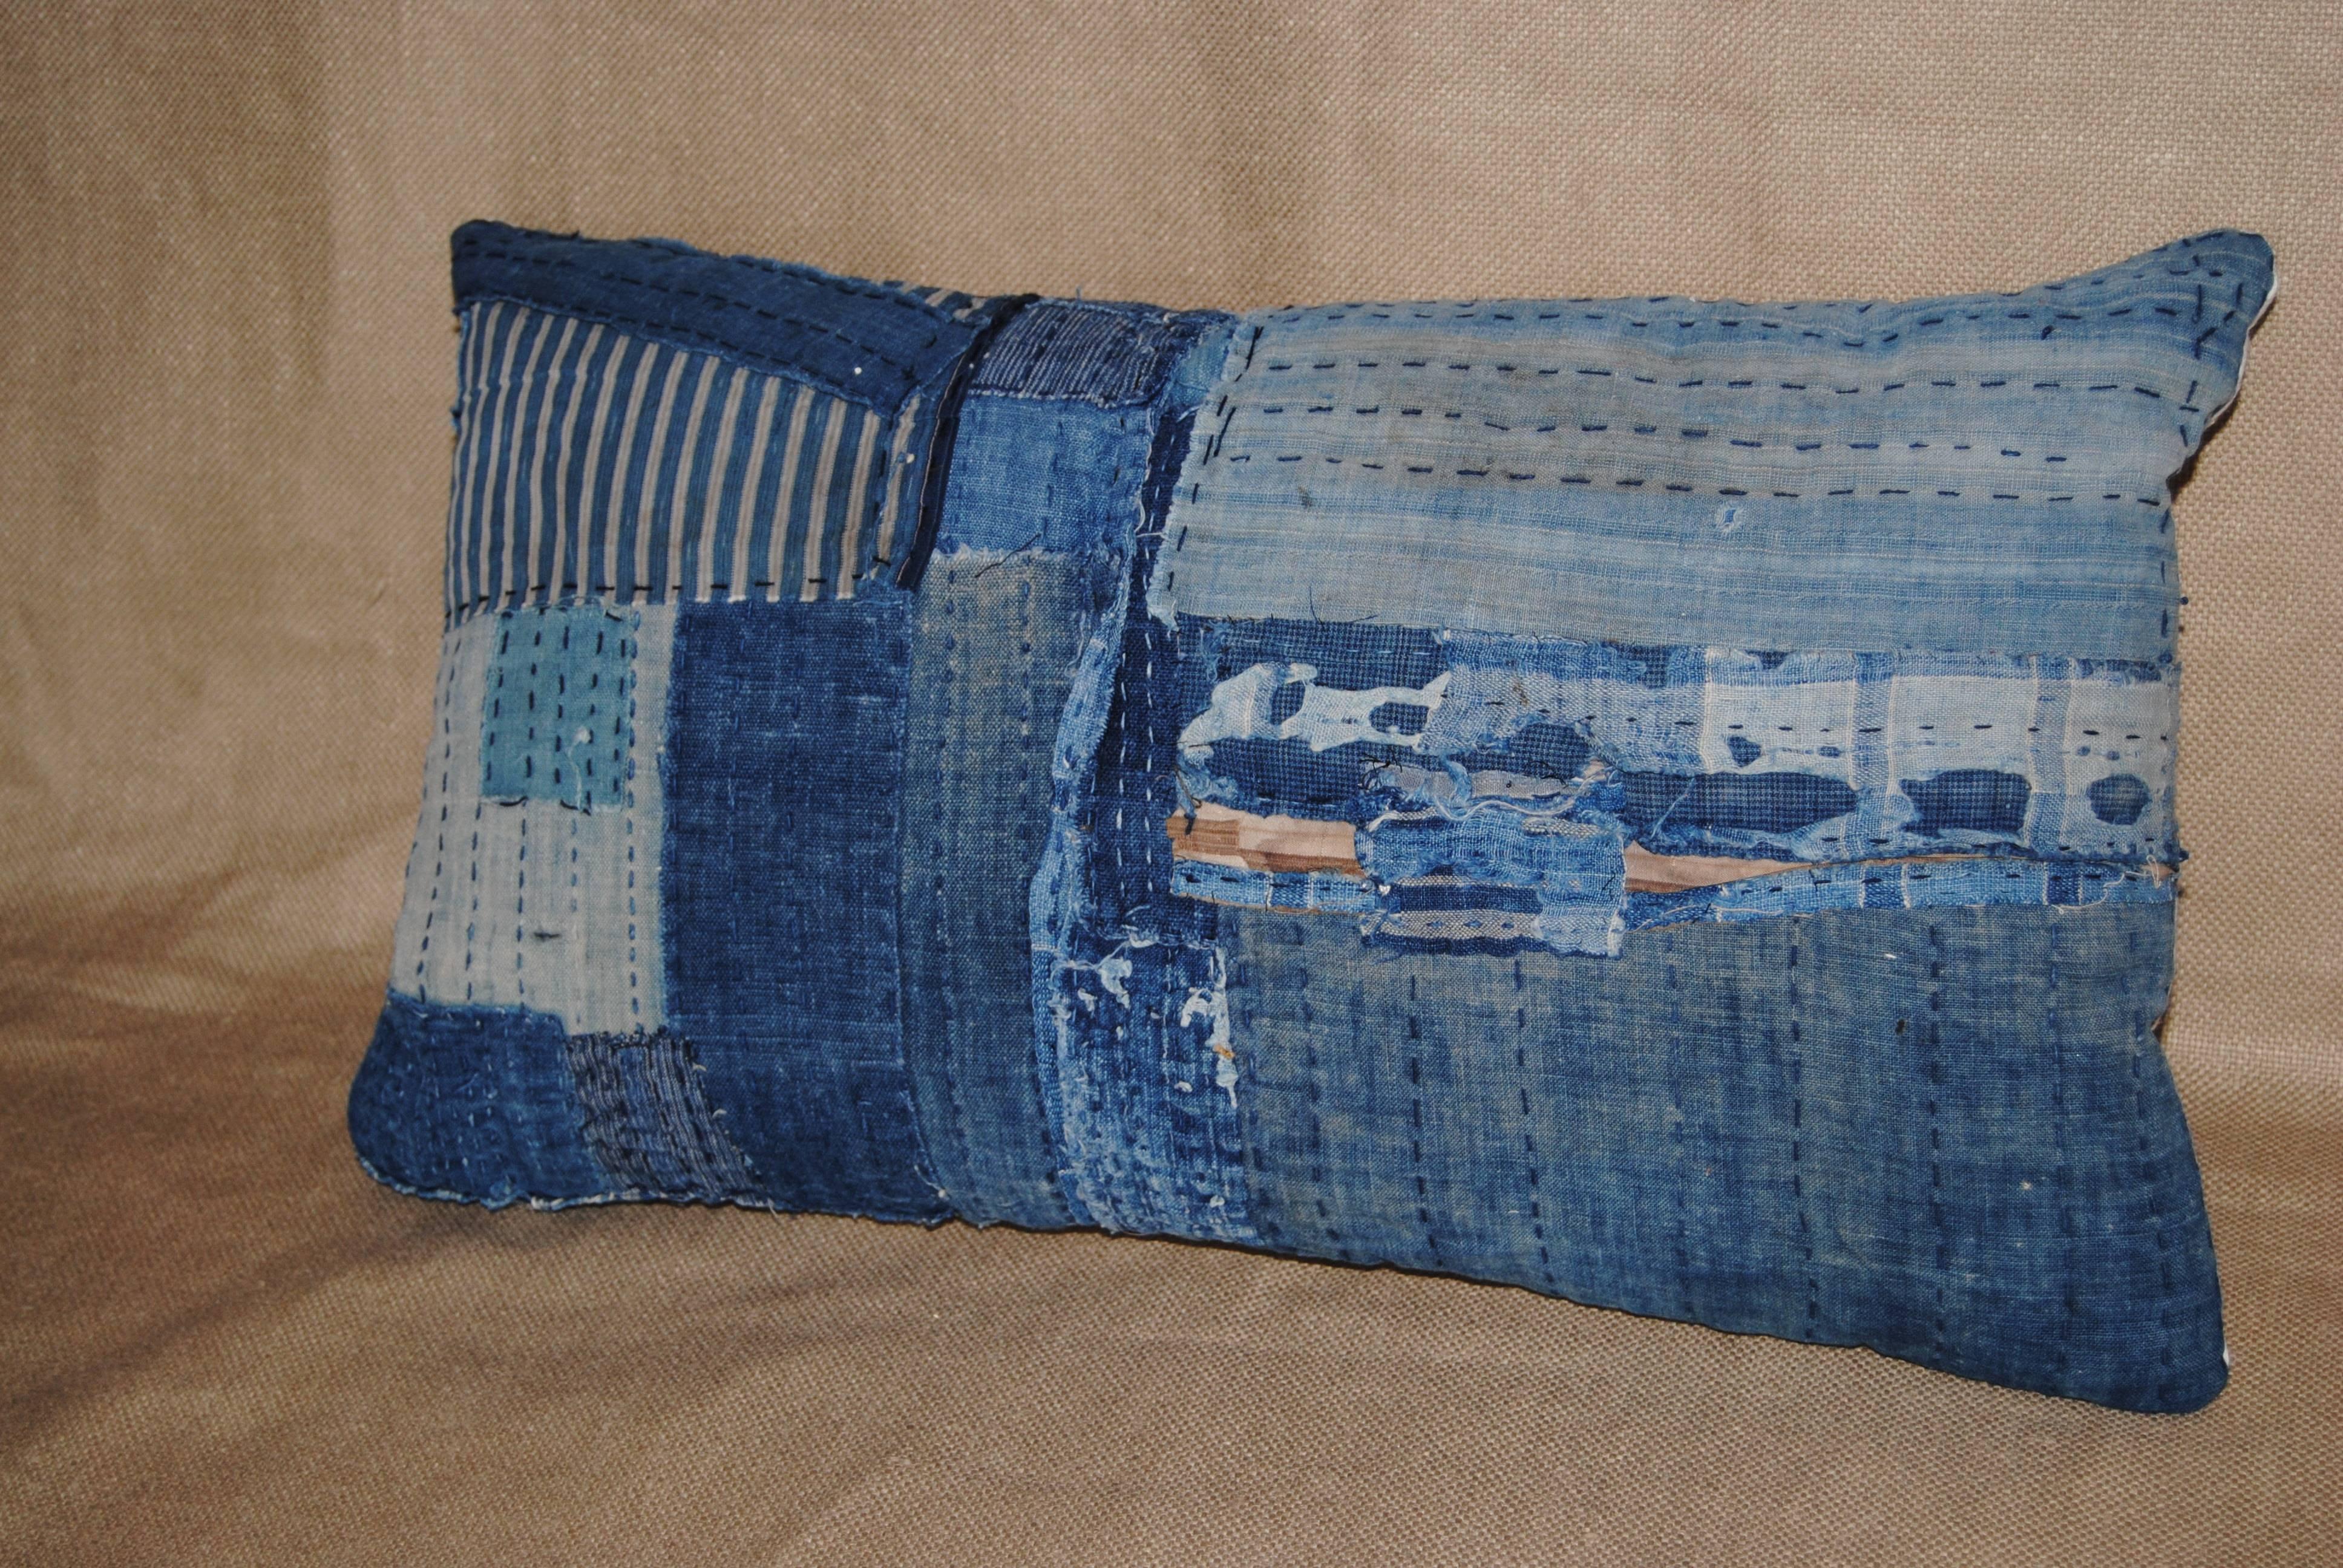 Custom pillow cut from an antique Japanese indigo boro futon cover. The farmers and fisherman were not allowed to wear silk. Every scrap of hand loomed cotton indigo was saved for clothing and futon covers, patched together with sashiko stitching.